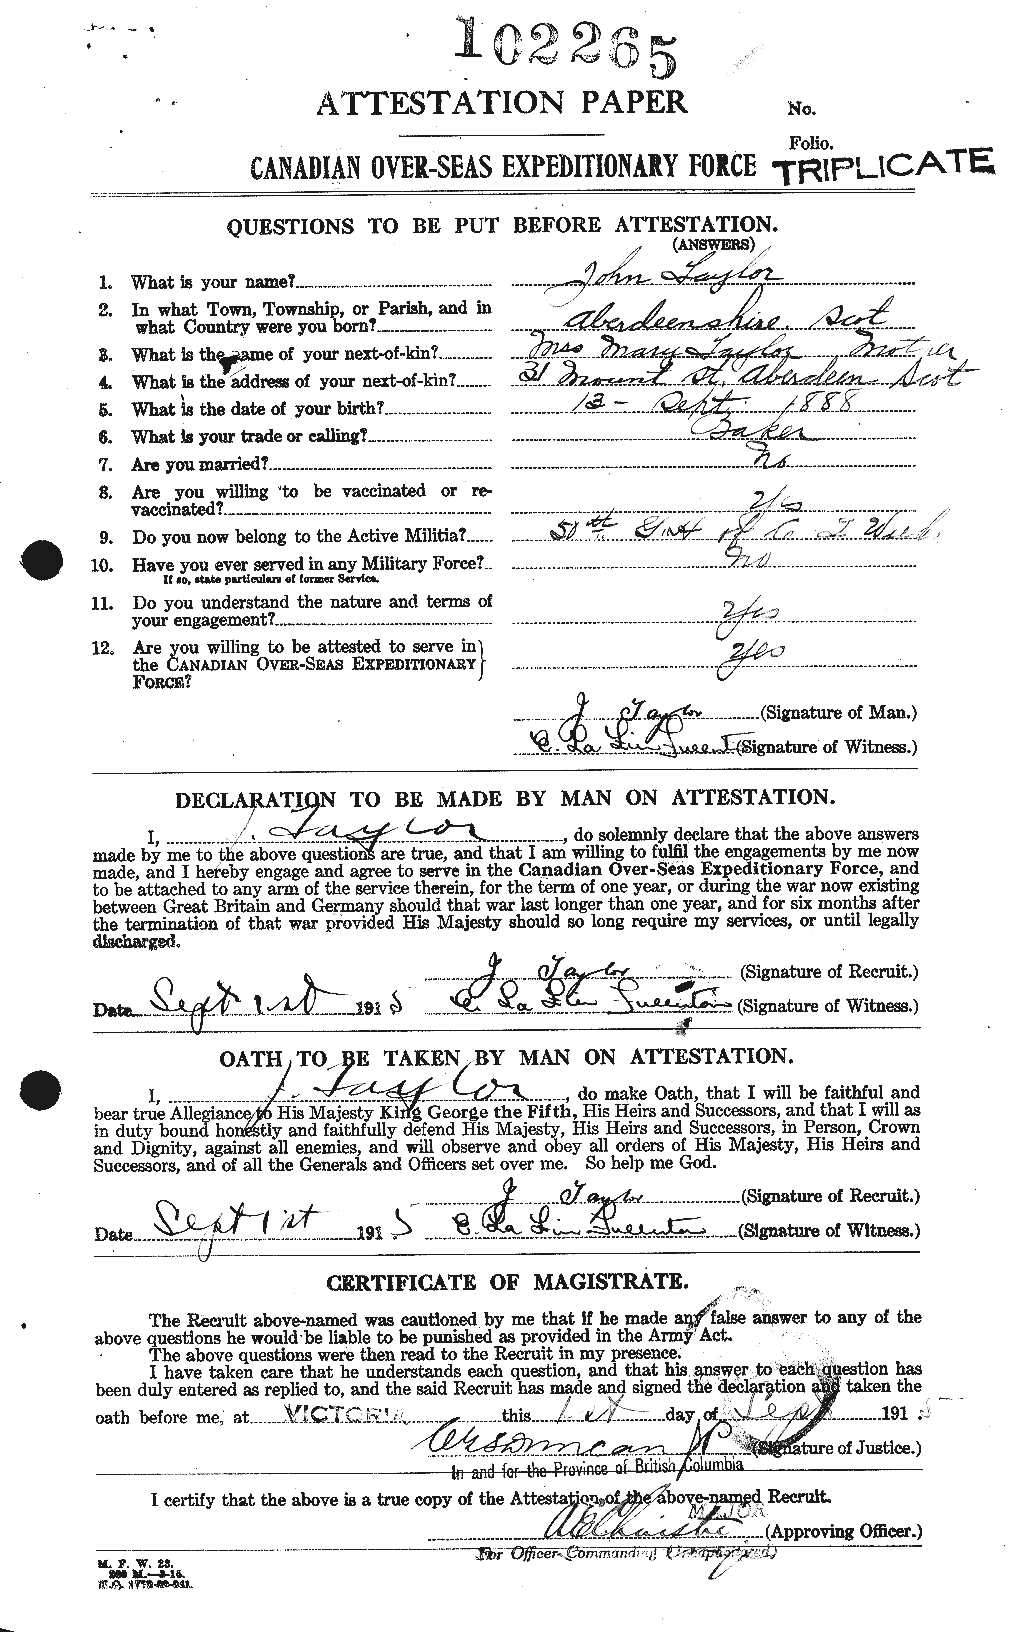 Personnel Records of the First World War - CEF 627013a